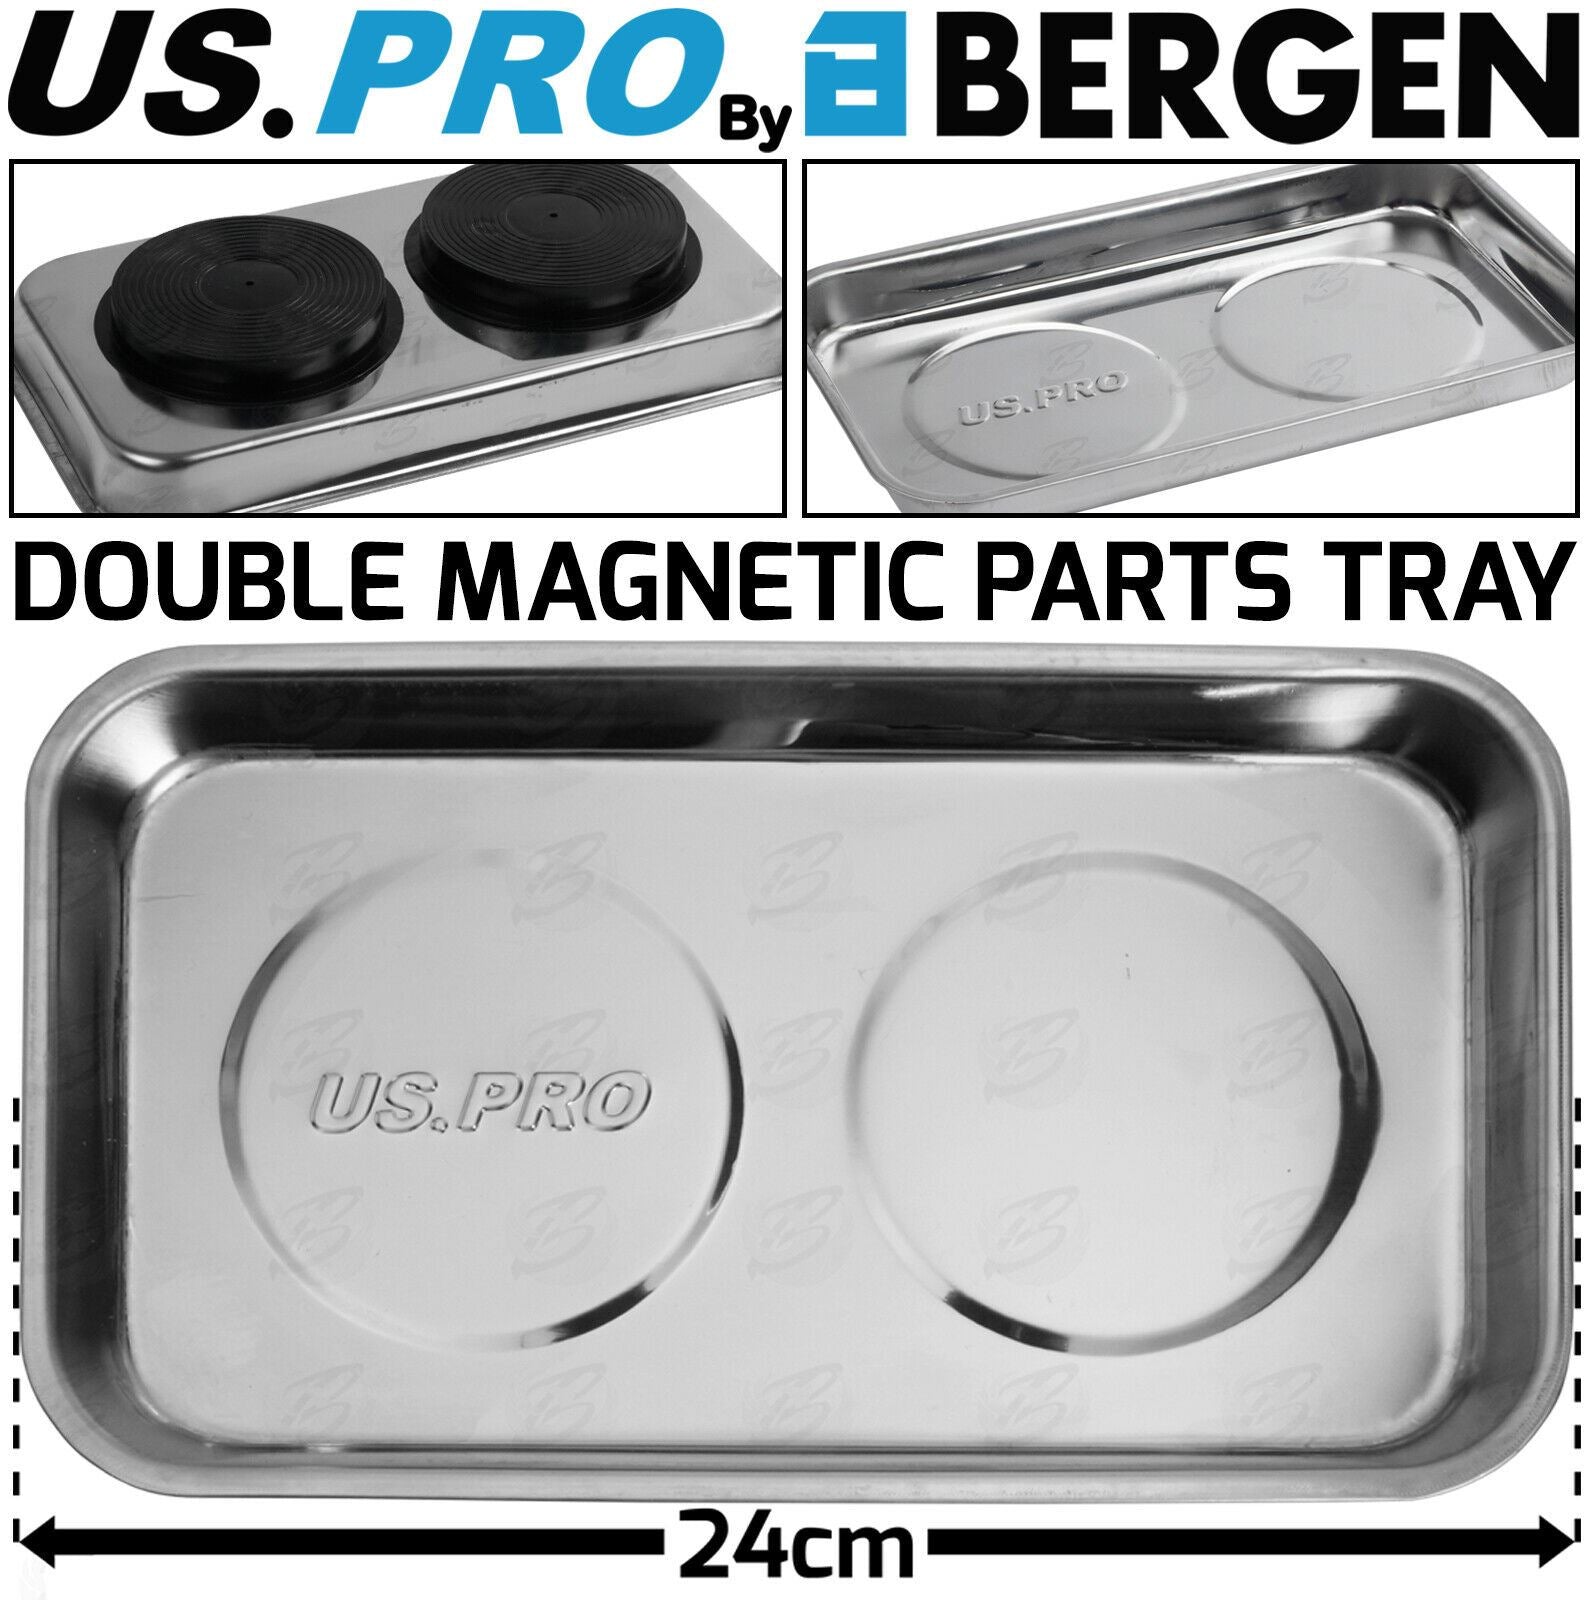 US PRO 9" STAINLESS STEEL DOUBLE MAGNETIC PARTS TRAY